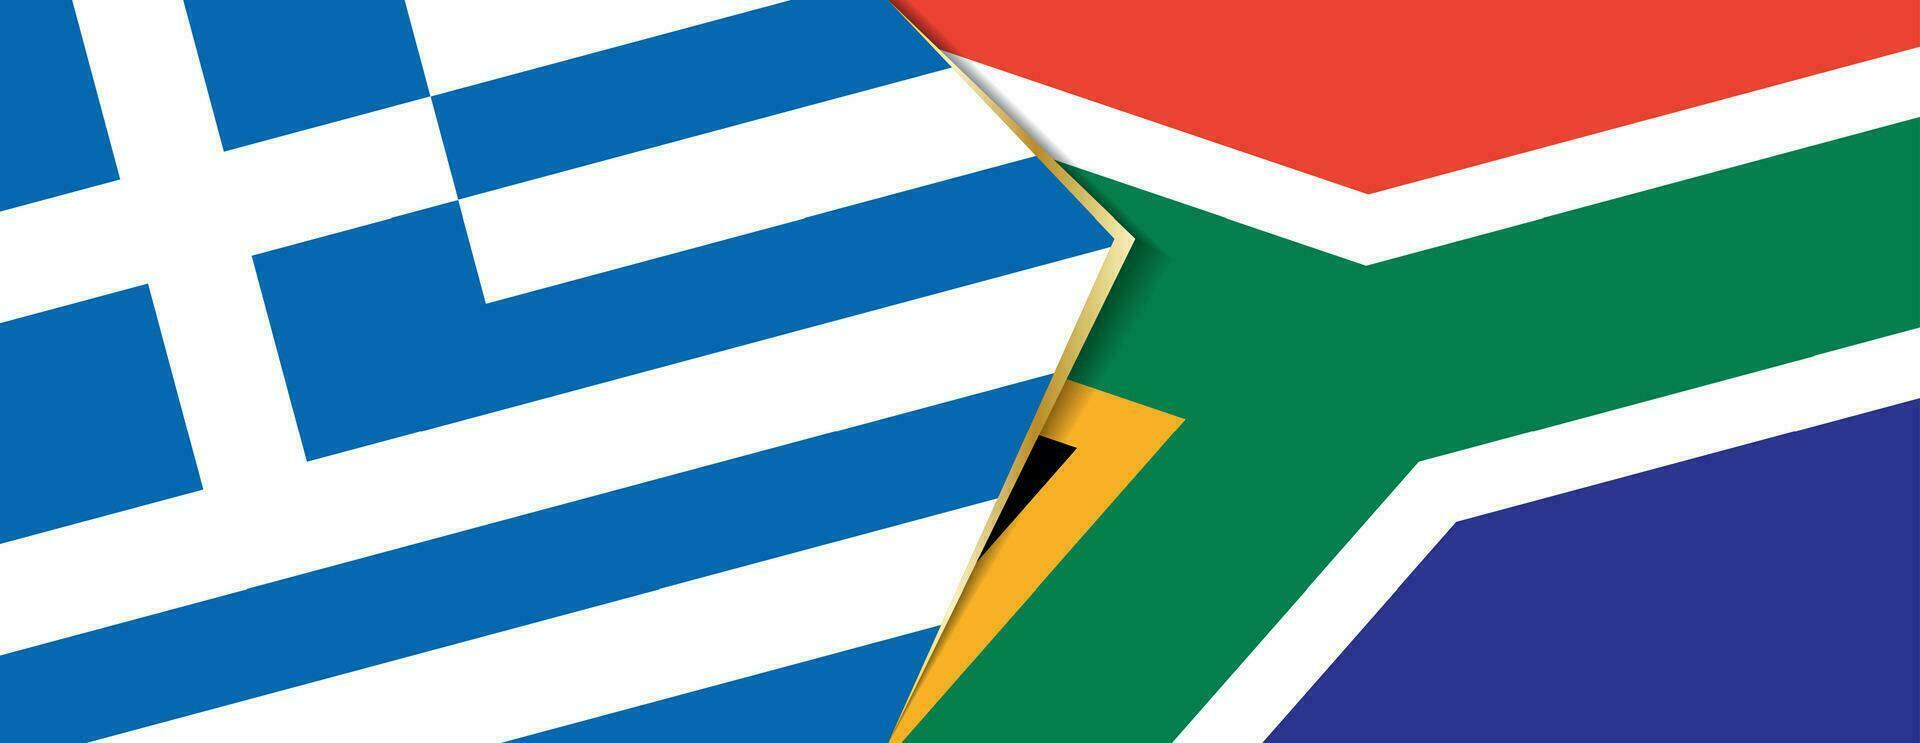 Greece and South Africa flags, two vector flags.